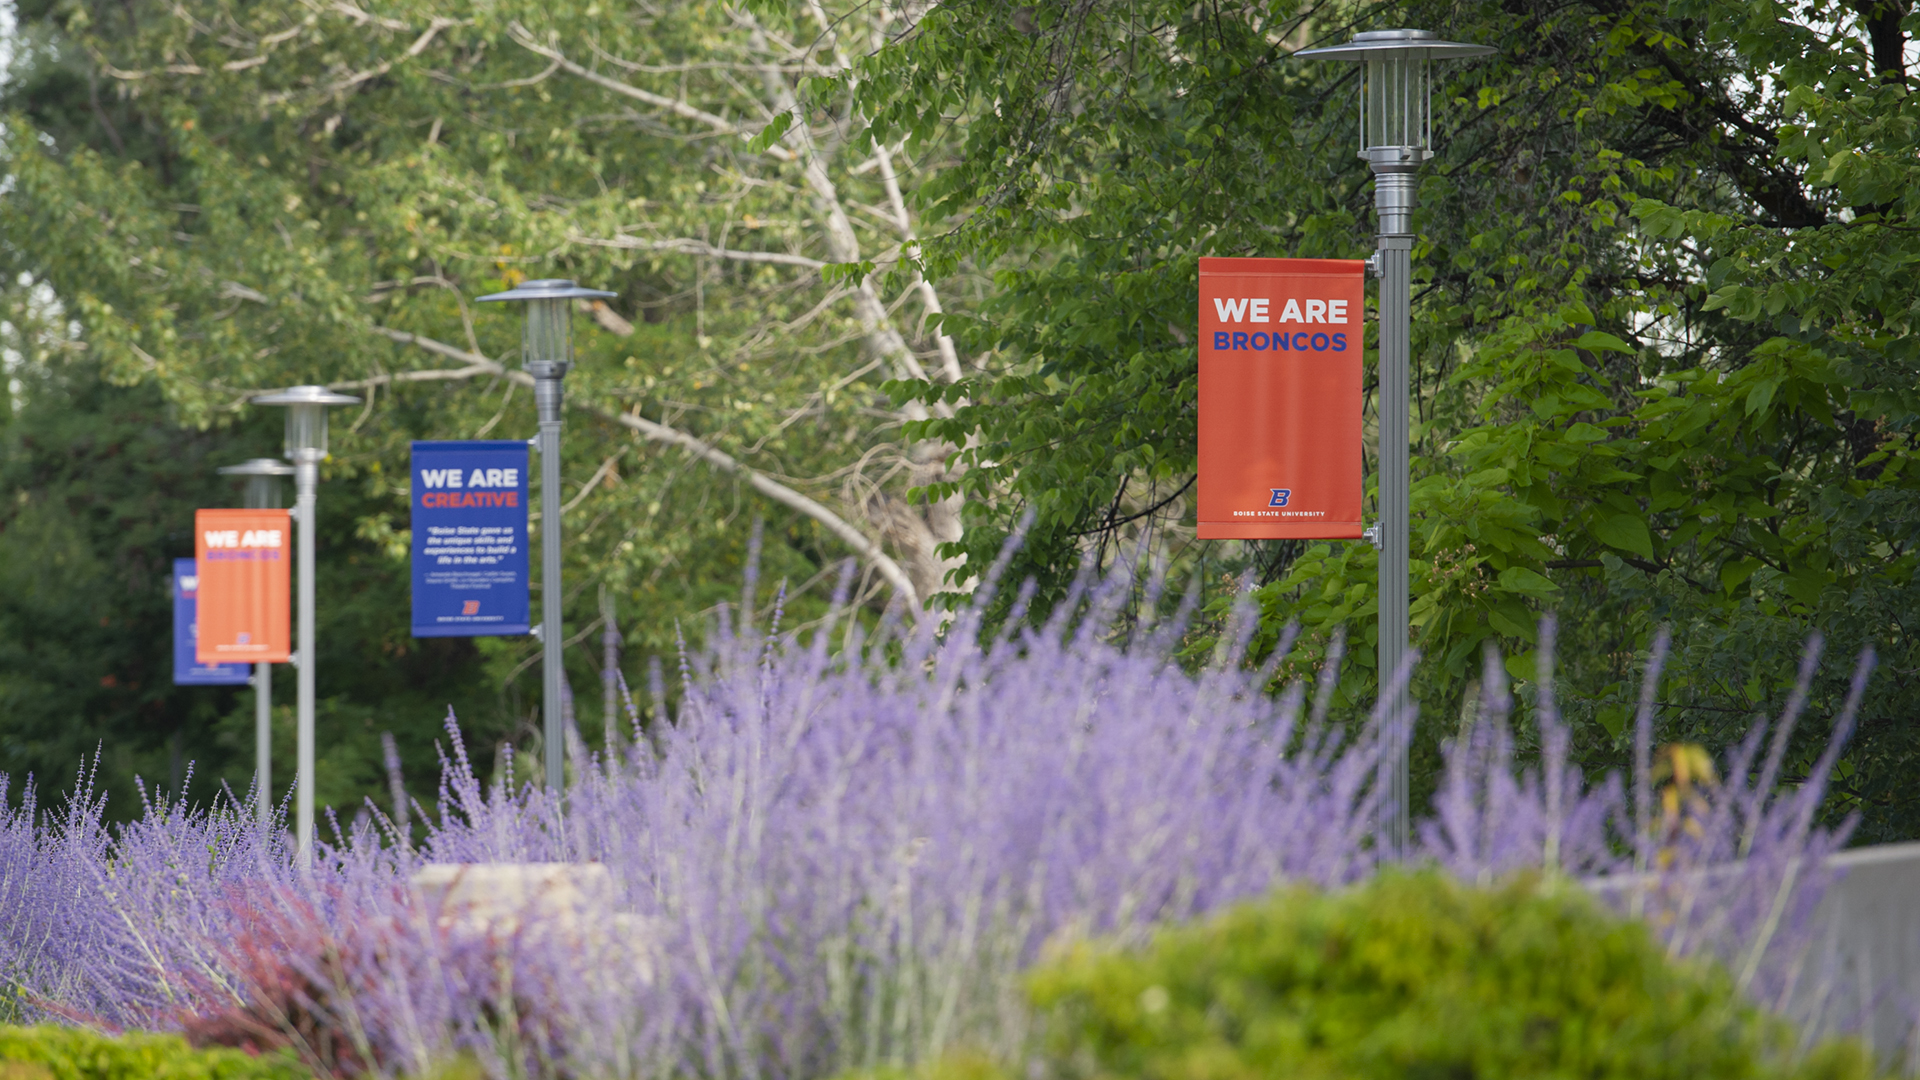 Campus Banners - We are Broncos, We are creative